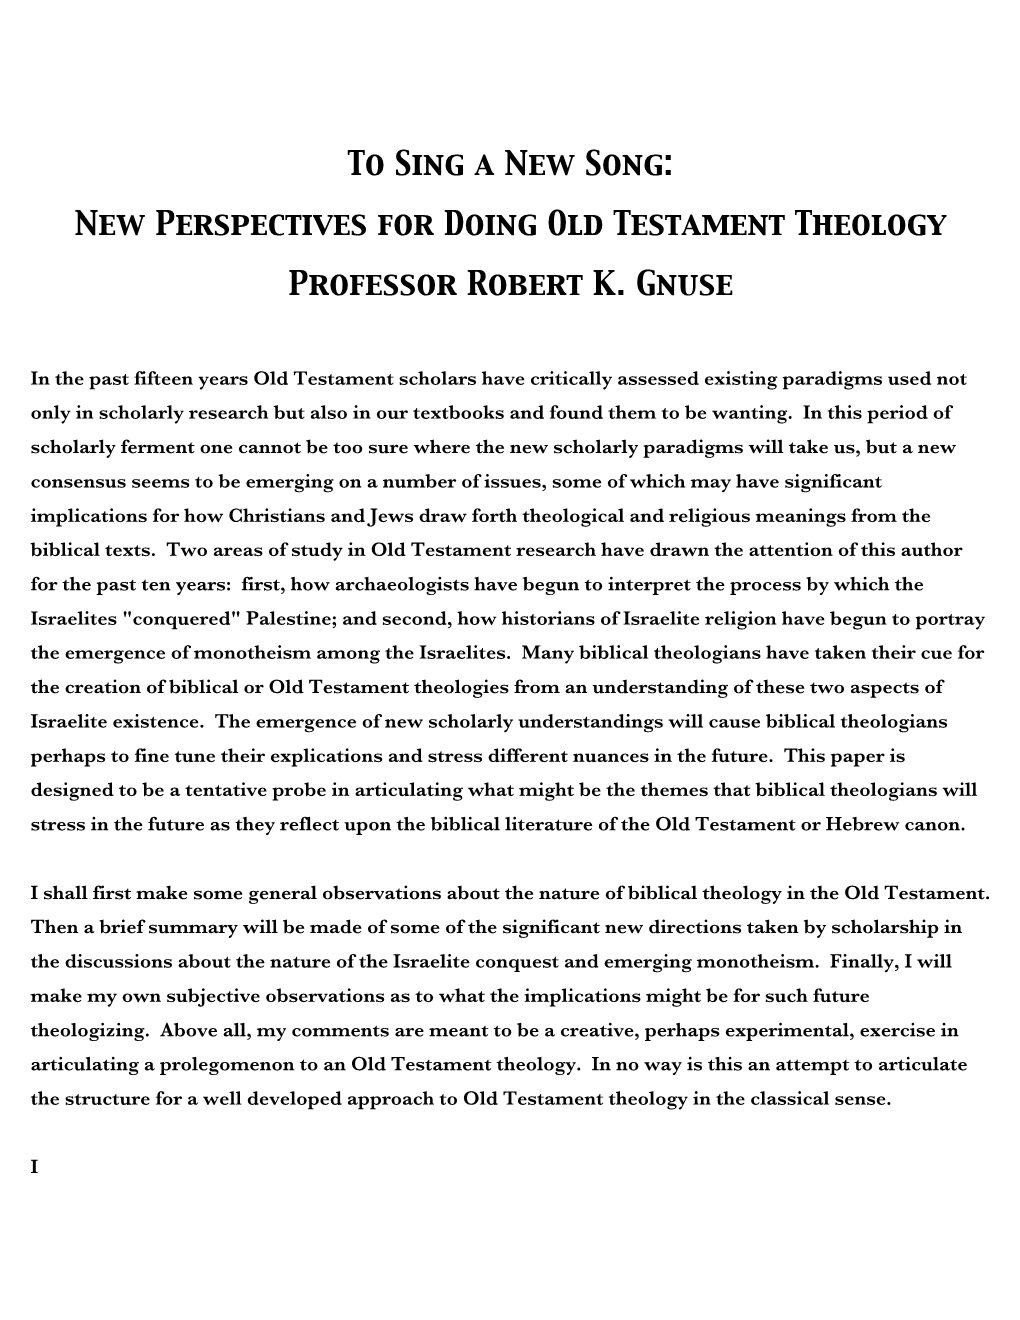 To Sing a New Song: New Perspectives for Doing Old Testament Theology Professor Robert K